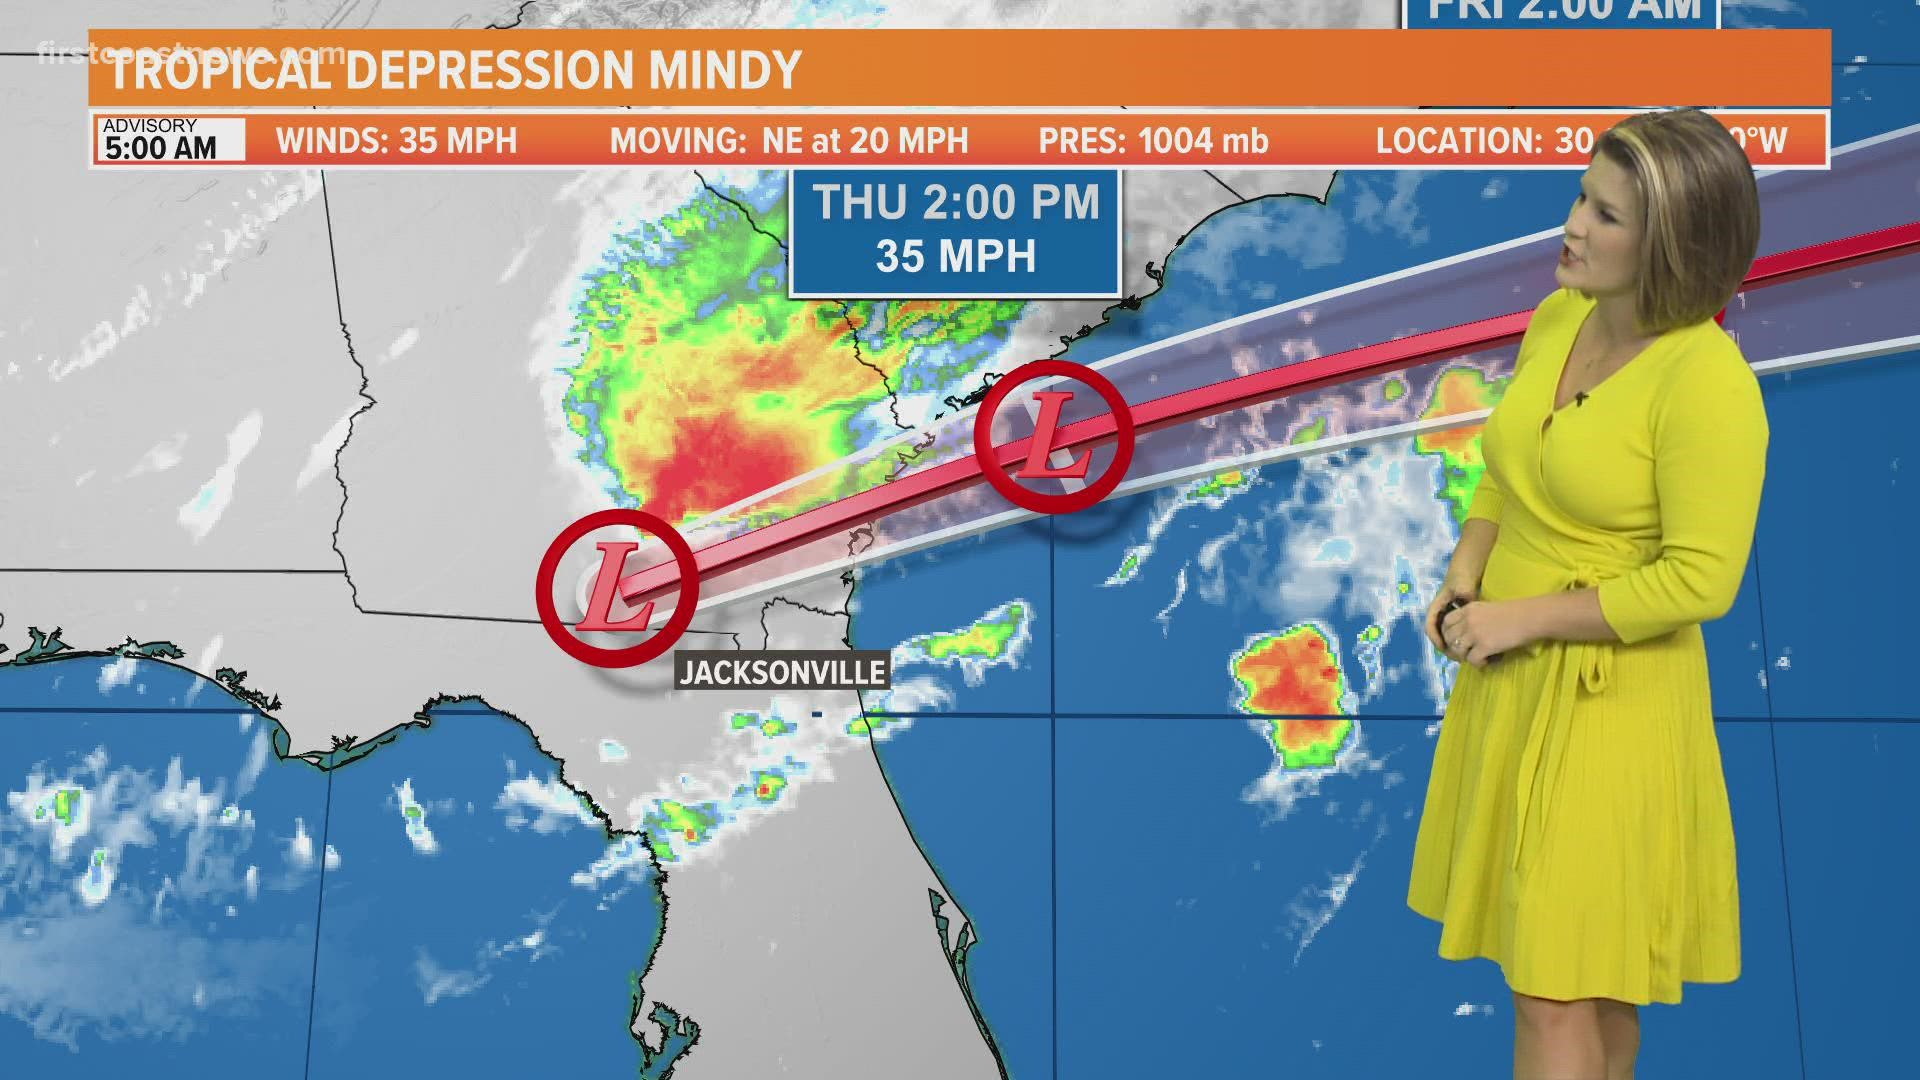 Mindy will bring winds and clouds to the First Coast throughout Thursday, with a wind advisory in place through 5 p.m.